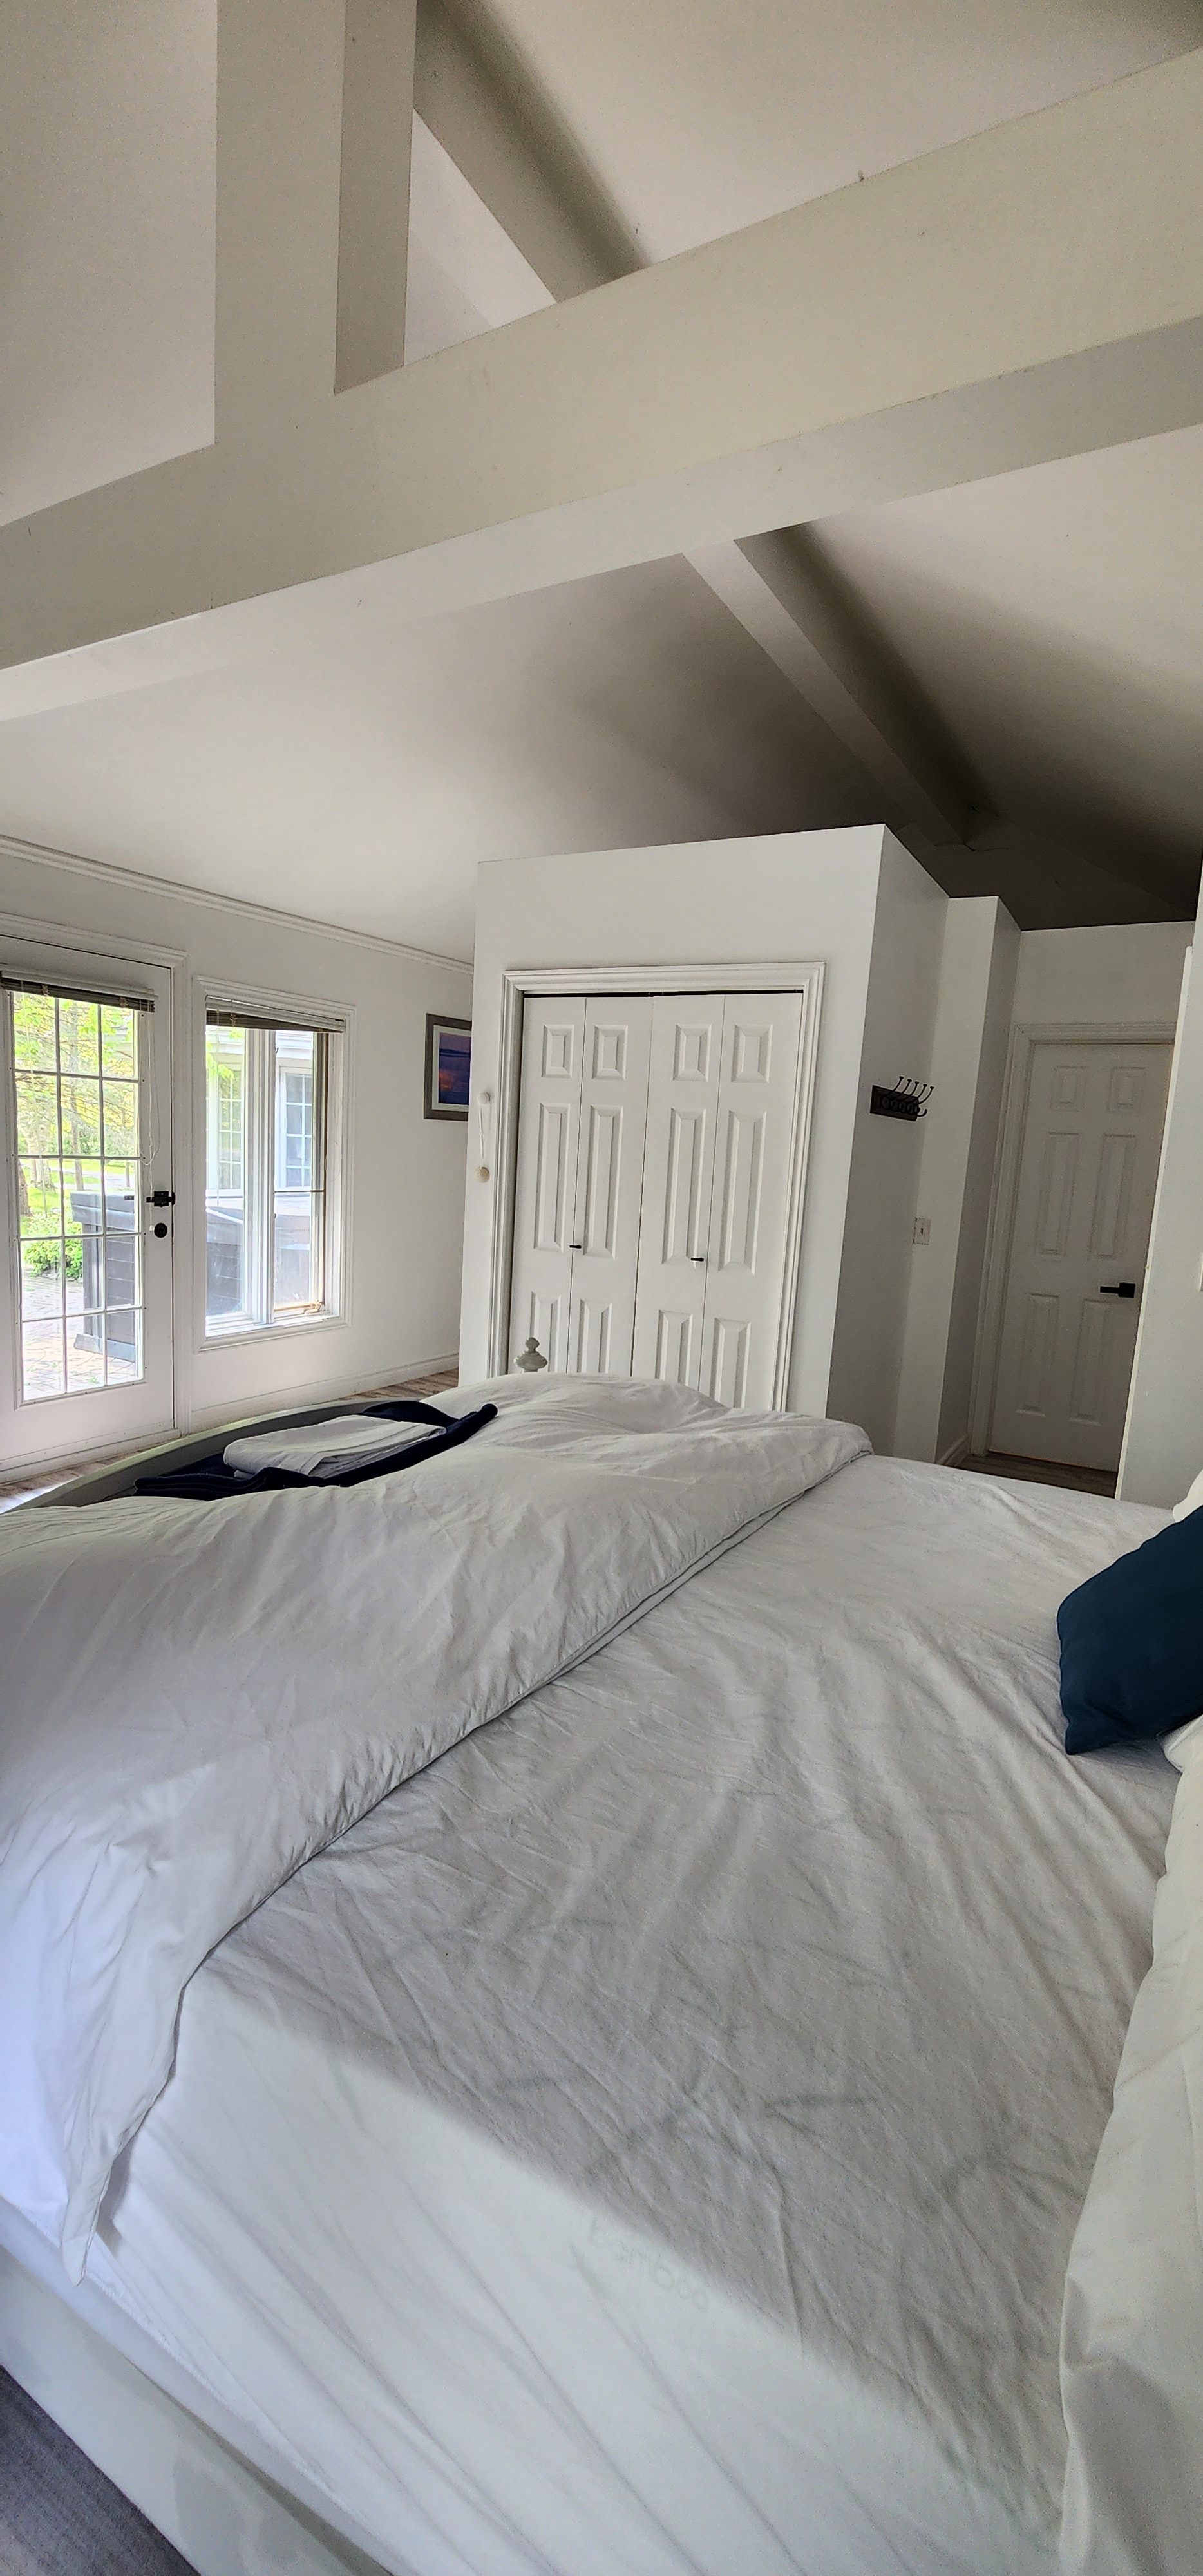 Airbnb cottages for rent prince edward county